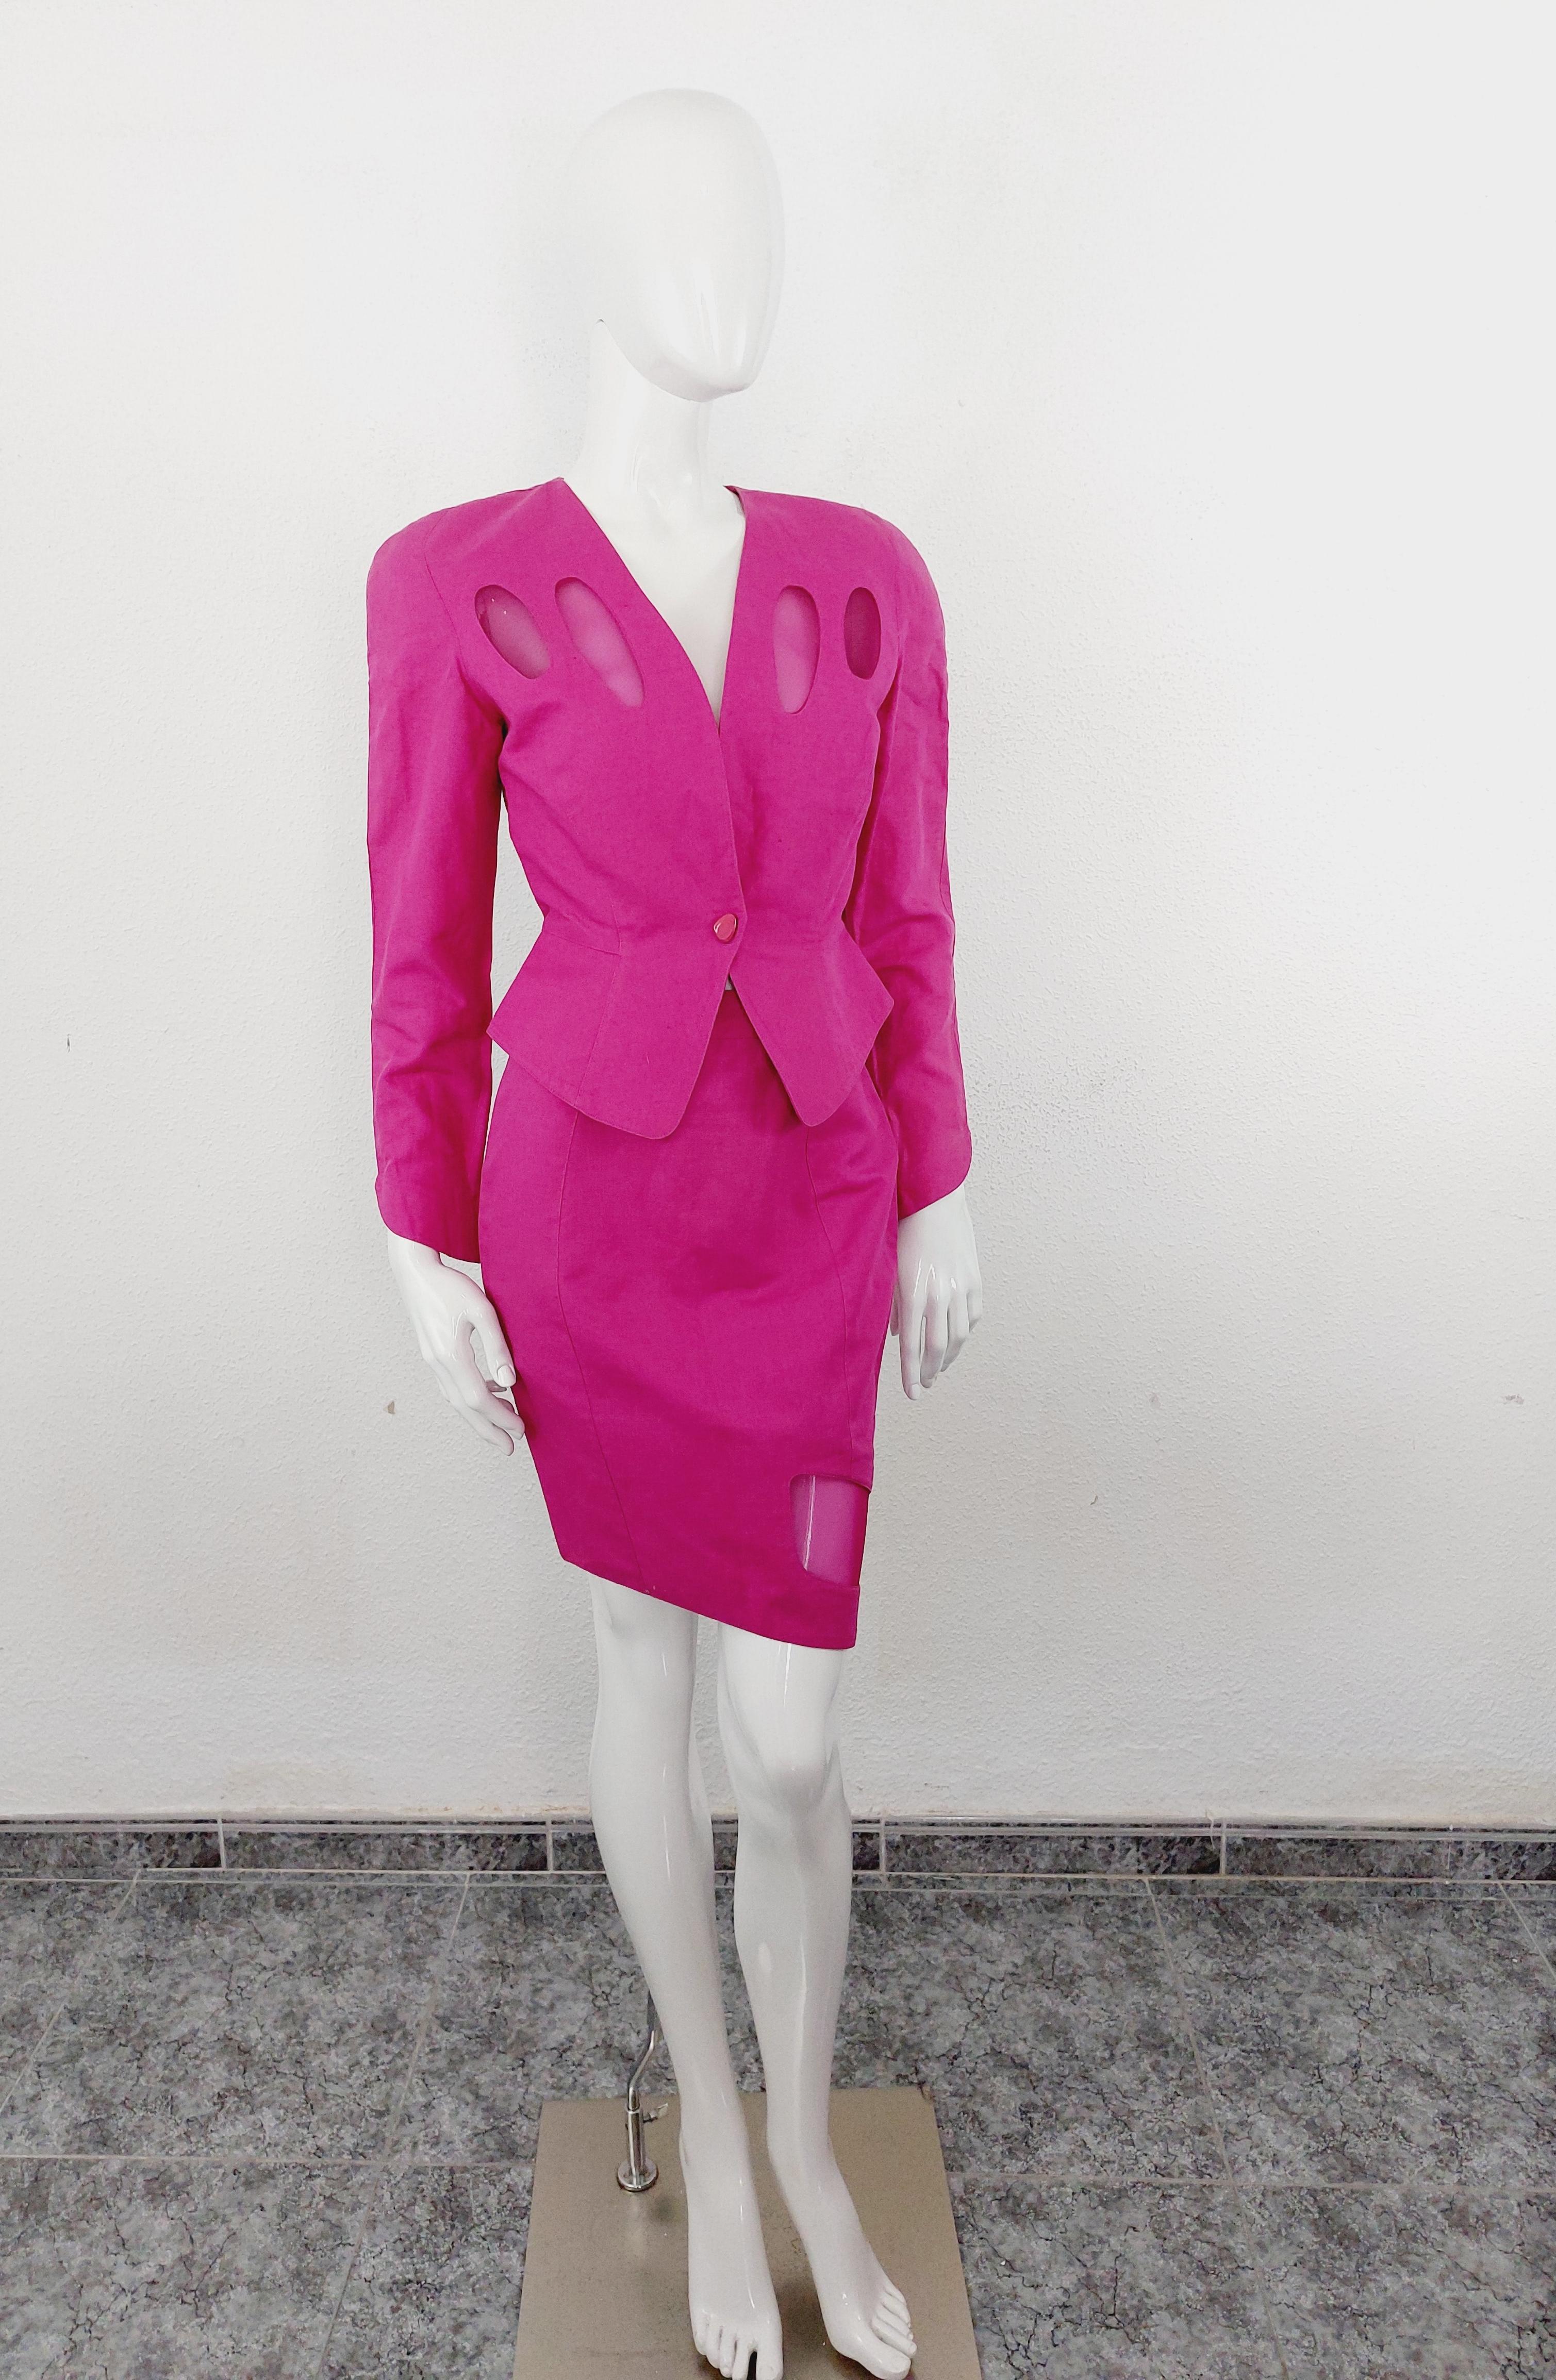 Thierry Mugler Active 1980s Pink Sculptural Silhouette Cutout Transparent Skirt Blazer Suit Set


From a 1980s Thierry Mugler Active collection, this suit features a pink cotton body. It features an hourglass silhouette, a front clasp closure and a